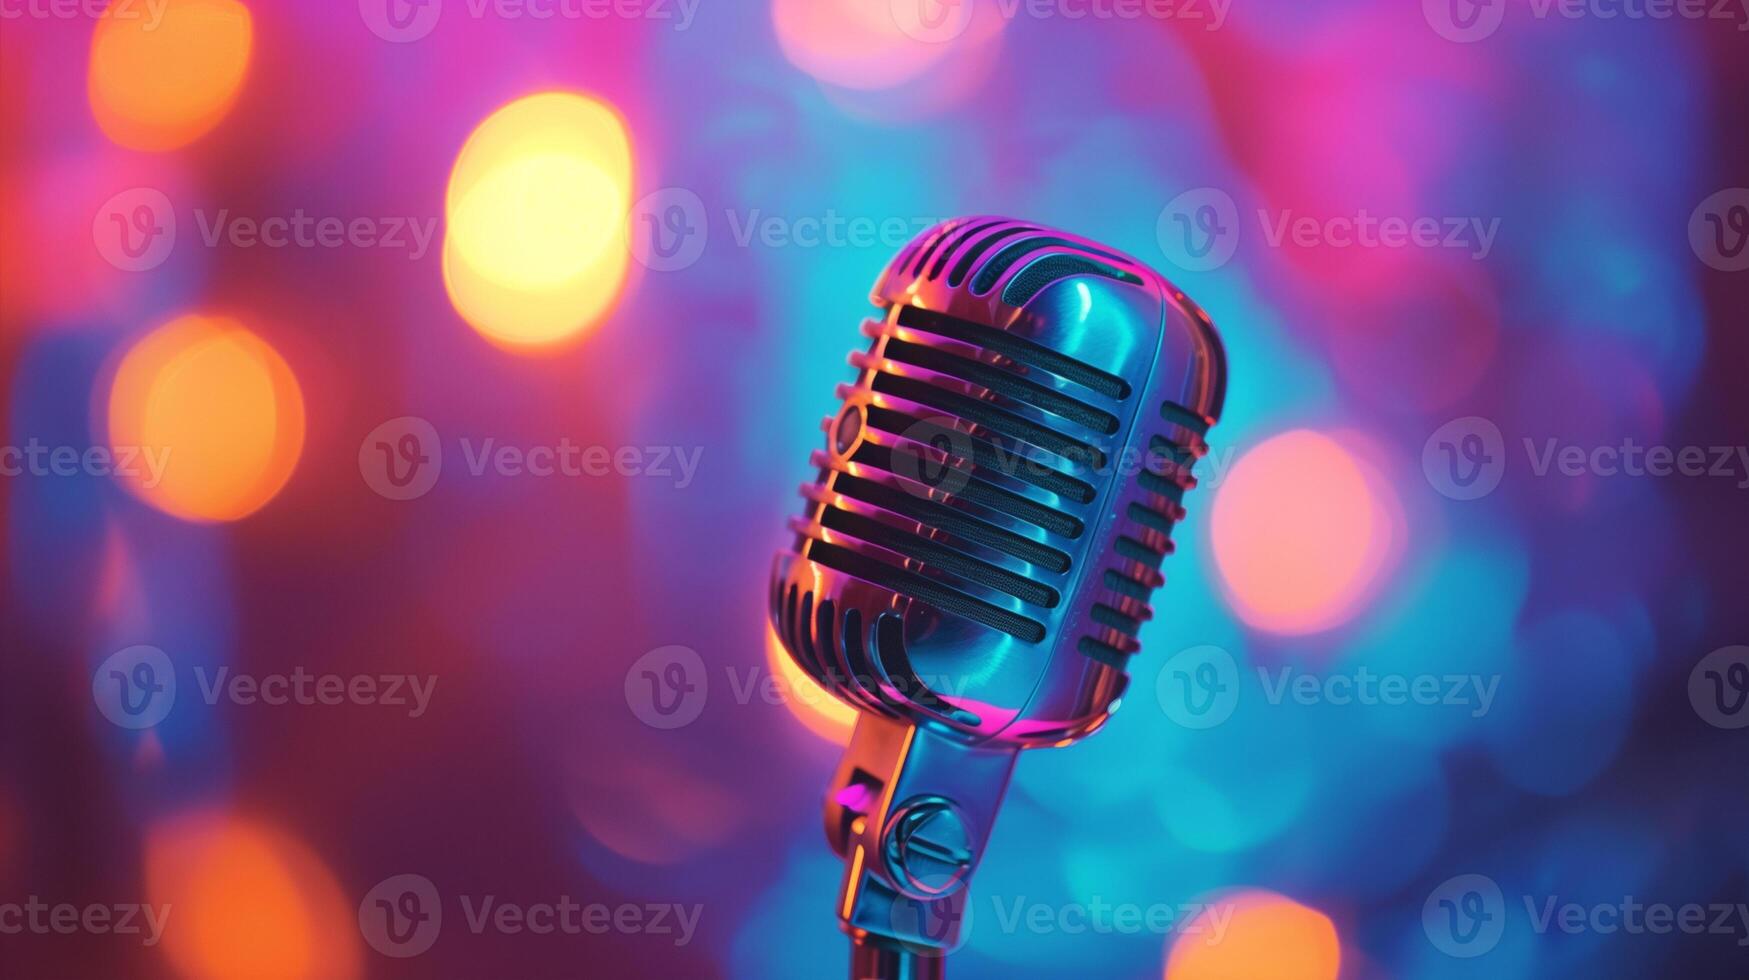 Microphone record sound in professional music voice studio on abstract background. photo